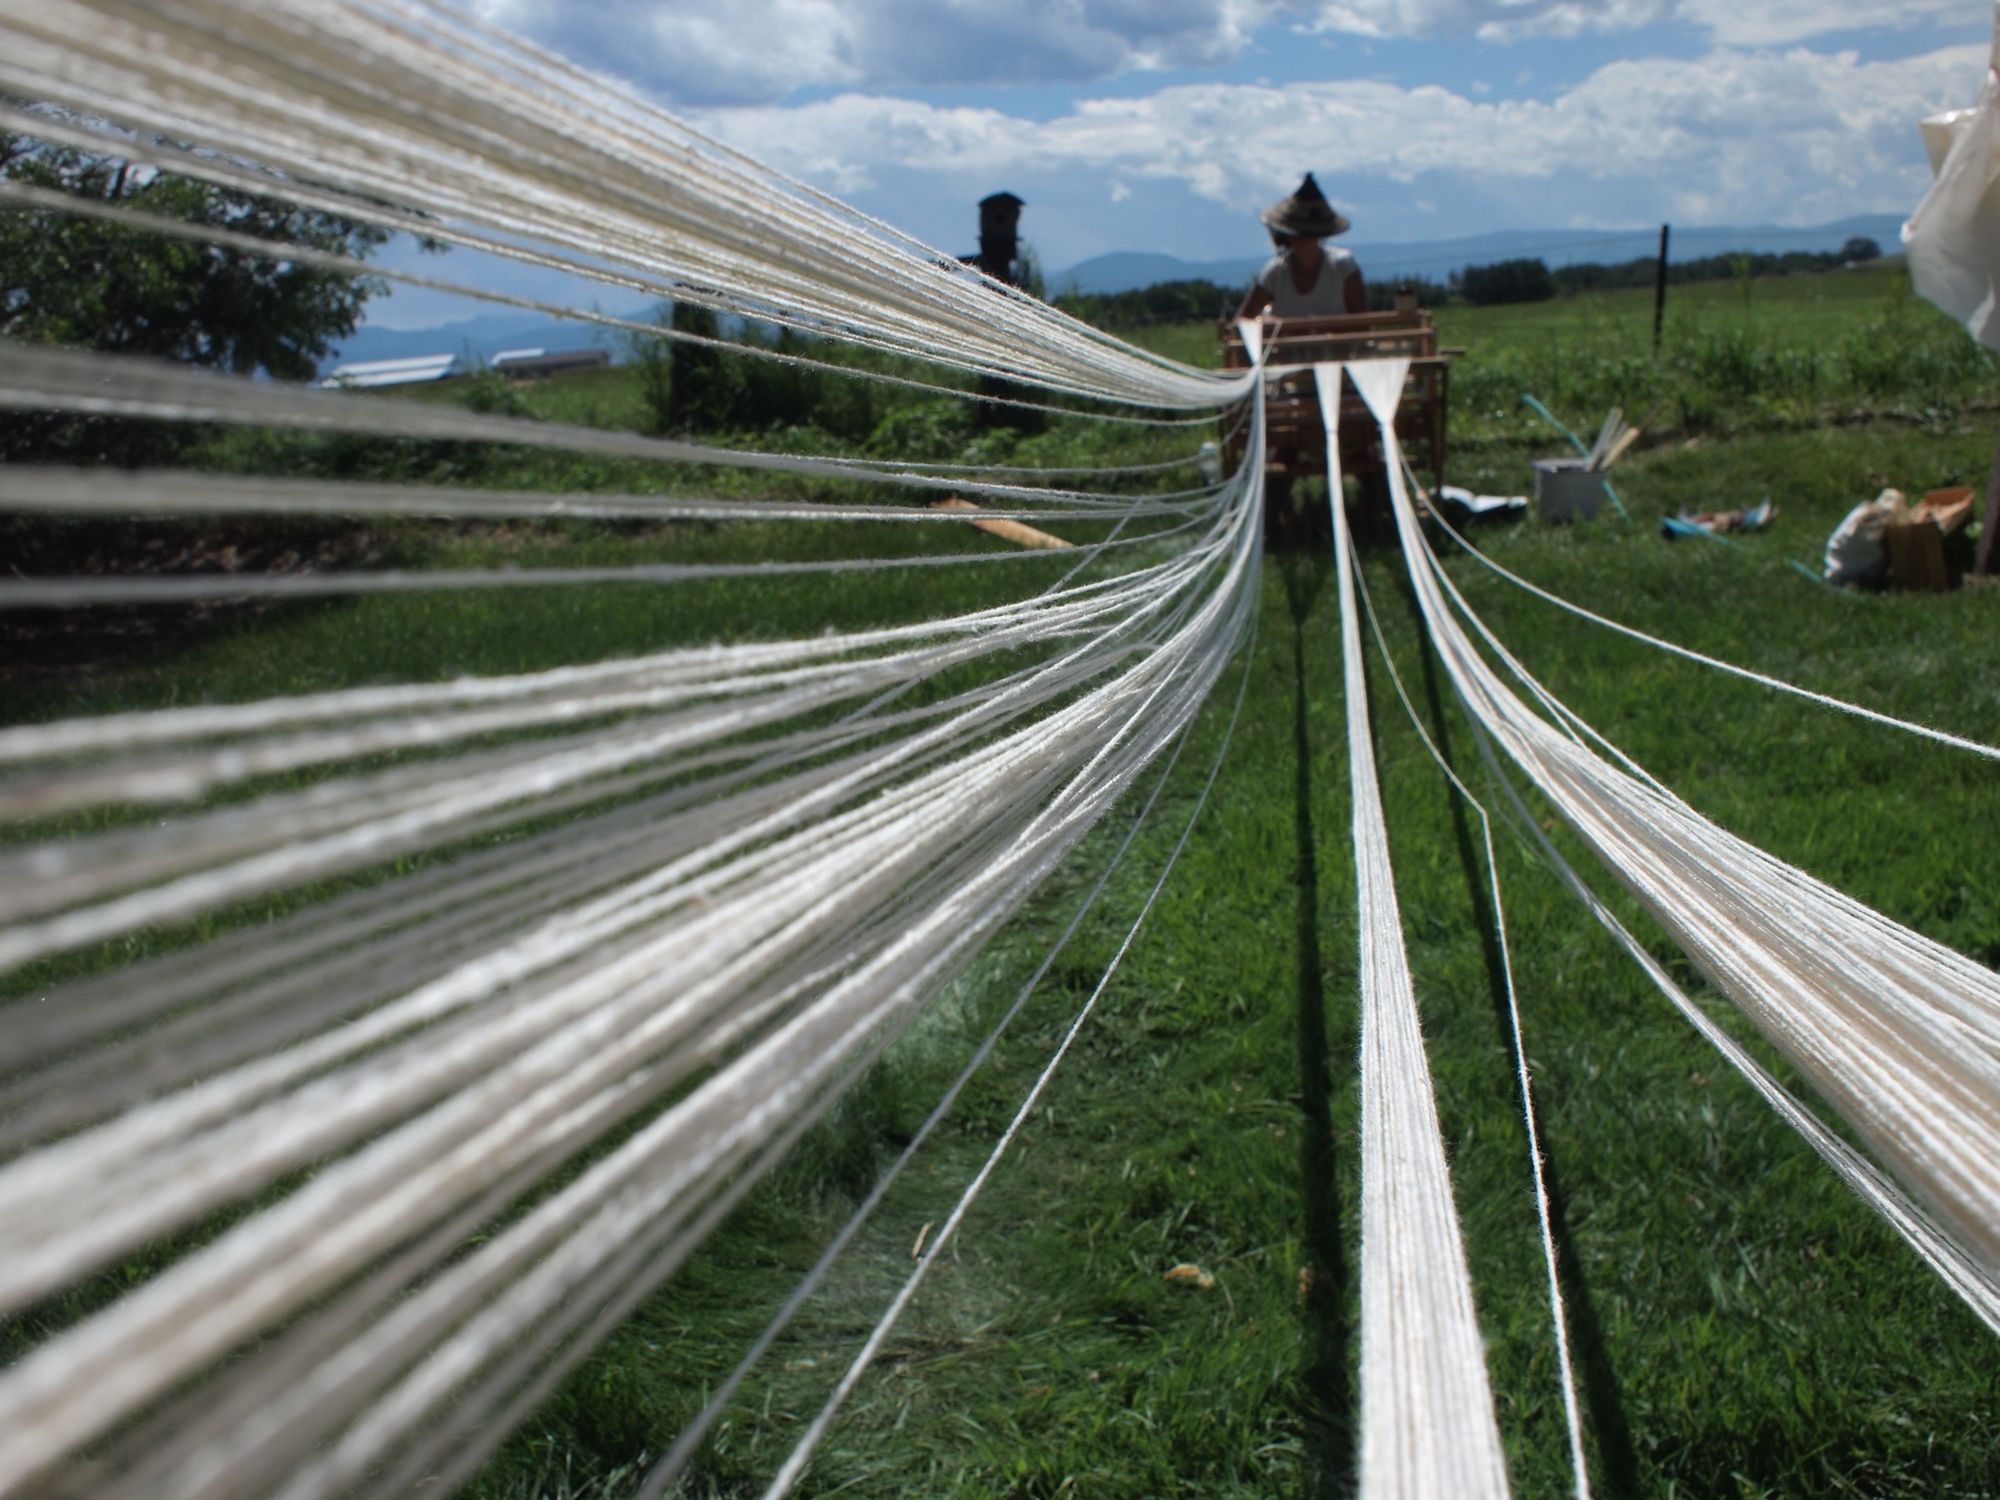 white strings lead from the camera to a woman in a pointy hat sitting at a loom in a green grassy field with blue cloudy skies and mountains in the background. 